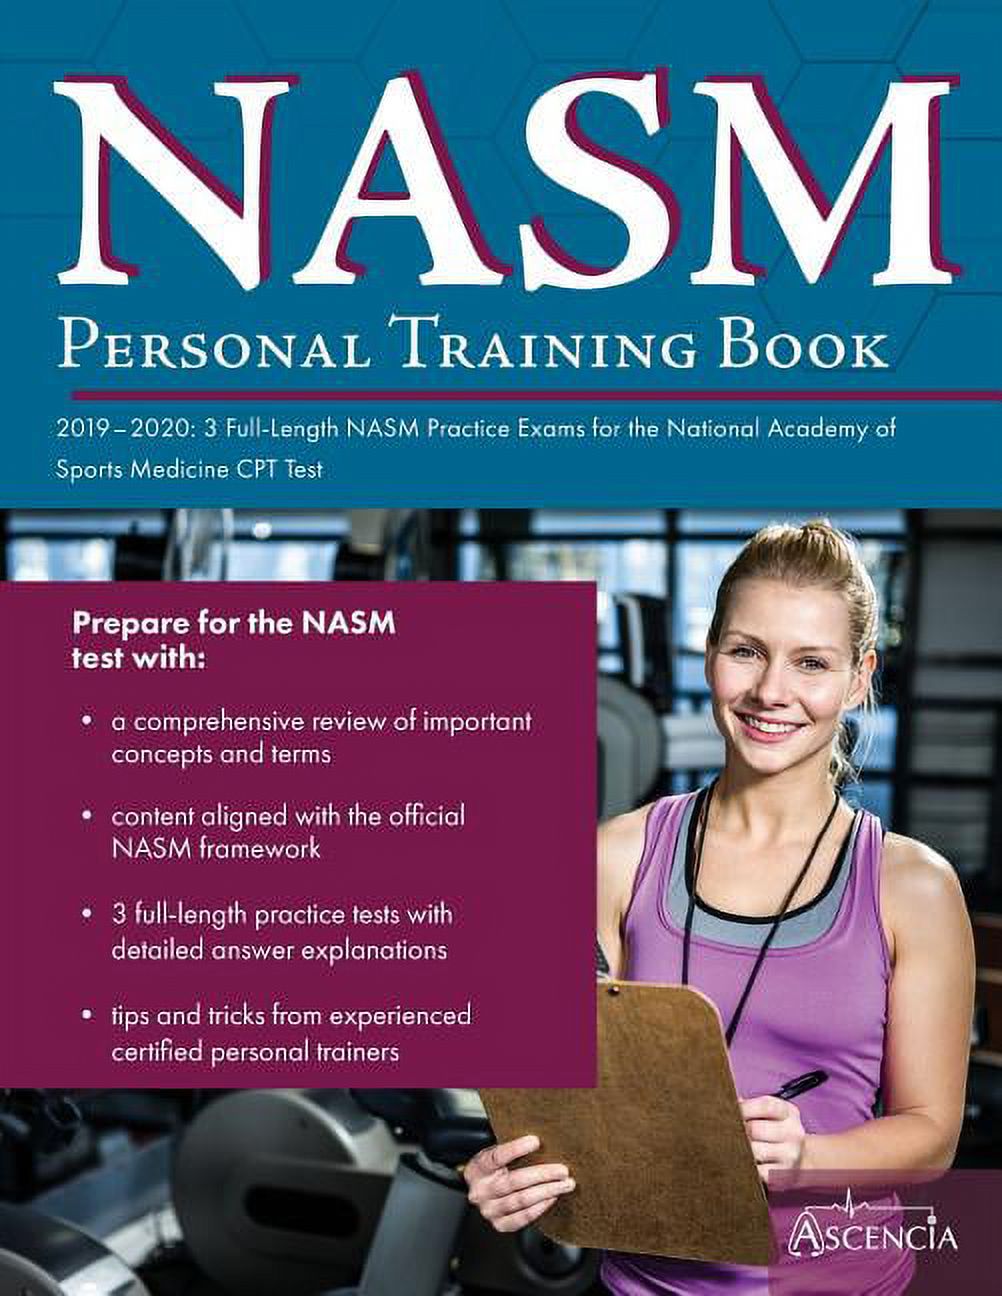 NASM Personal Training Book 2019-2020: 3 Full-Length NASM Practice Exams for the National Academy of Sports Medicine CPT Test (Paperback) - image 1 of 1